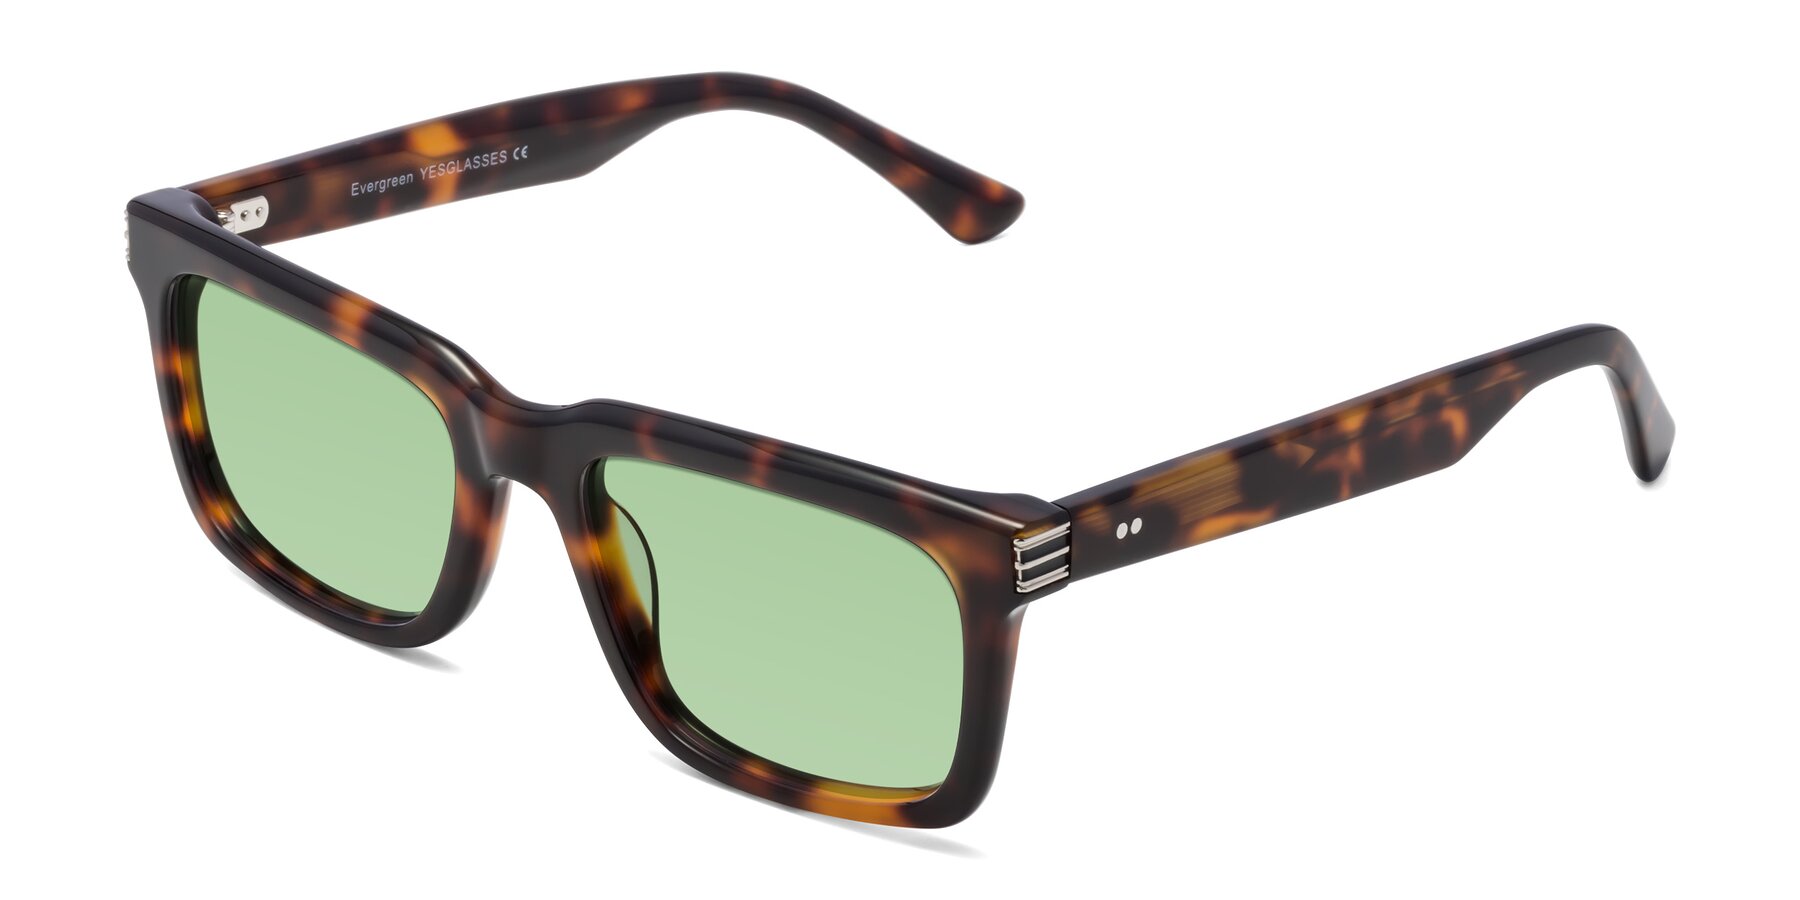 Angle of Evergreen in Tortoise with Medium Green Tinted Lenses